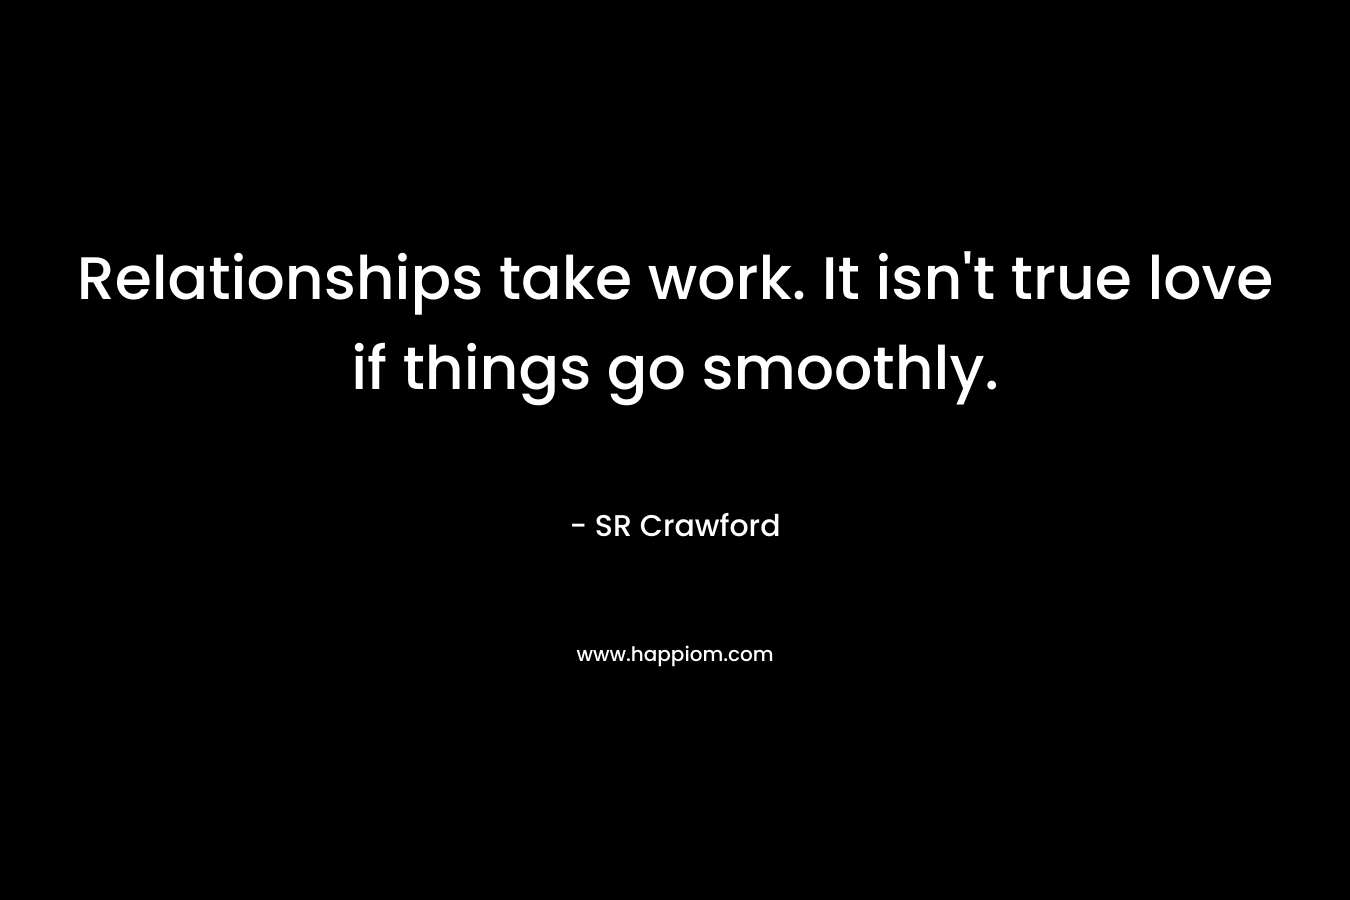 Relationships take work. It isn’t true love if things go smoothly. – SR Crawford